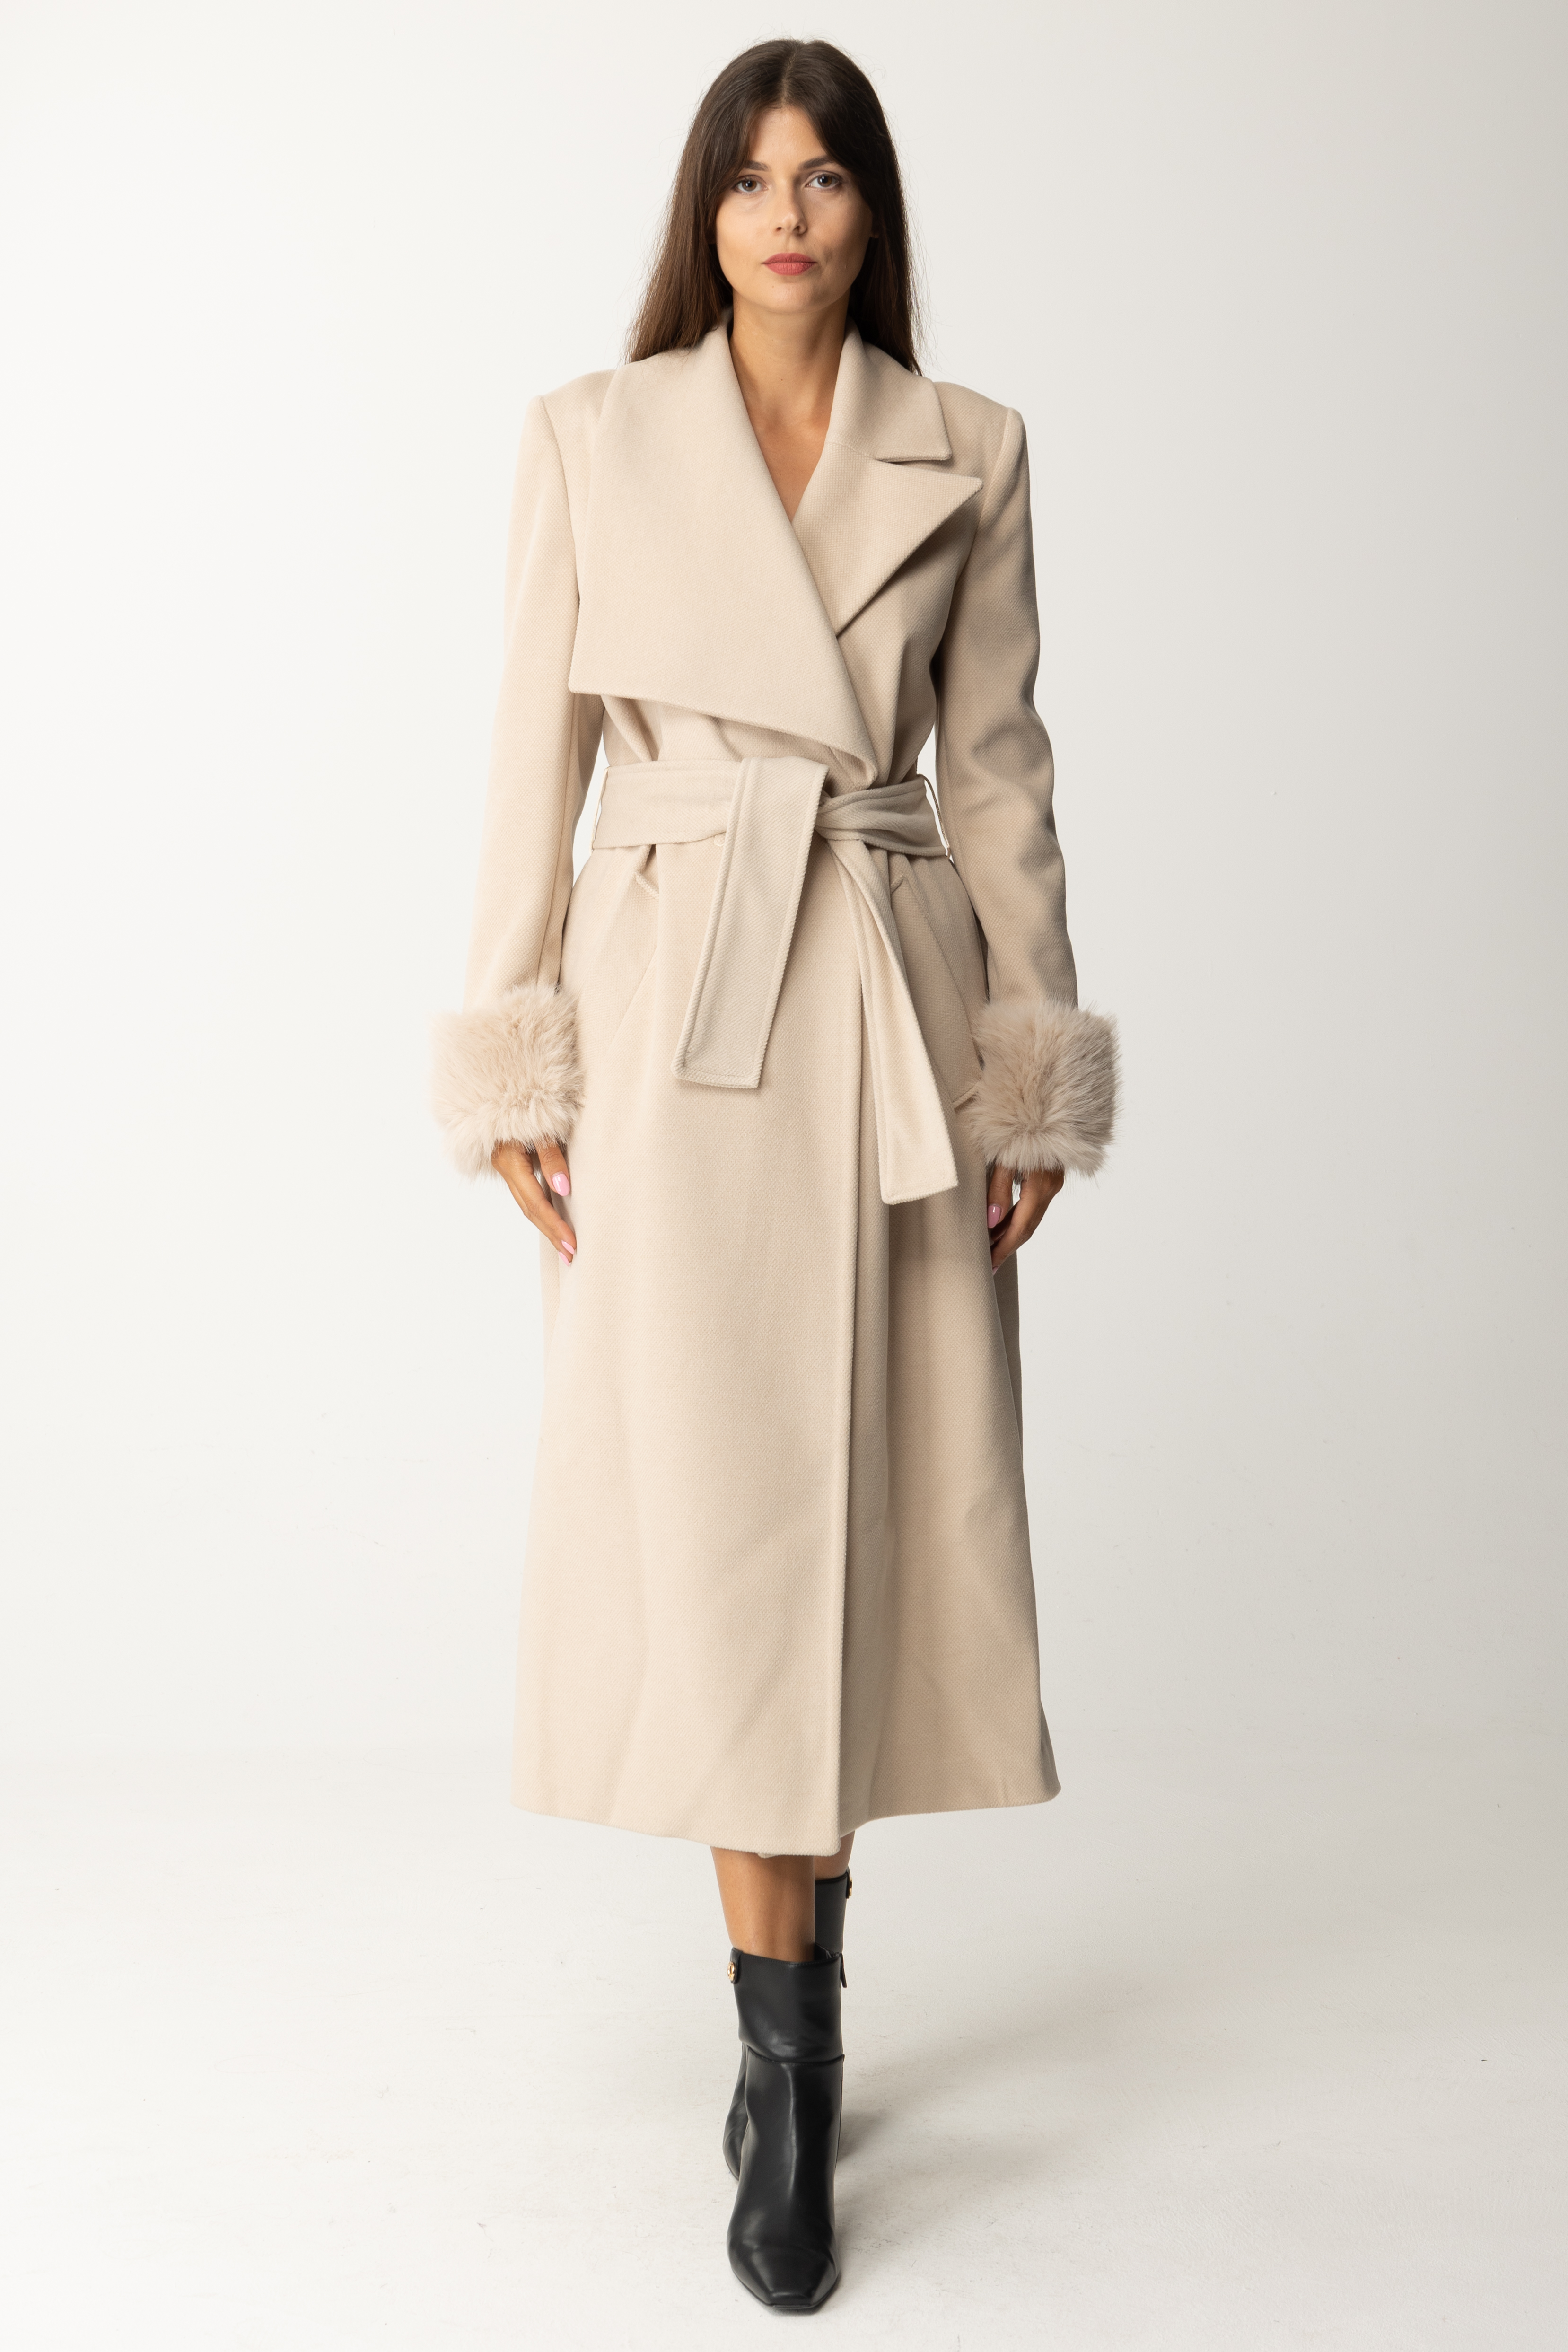 Preview: Yes London Coat with lapels and fur inserts Beige